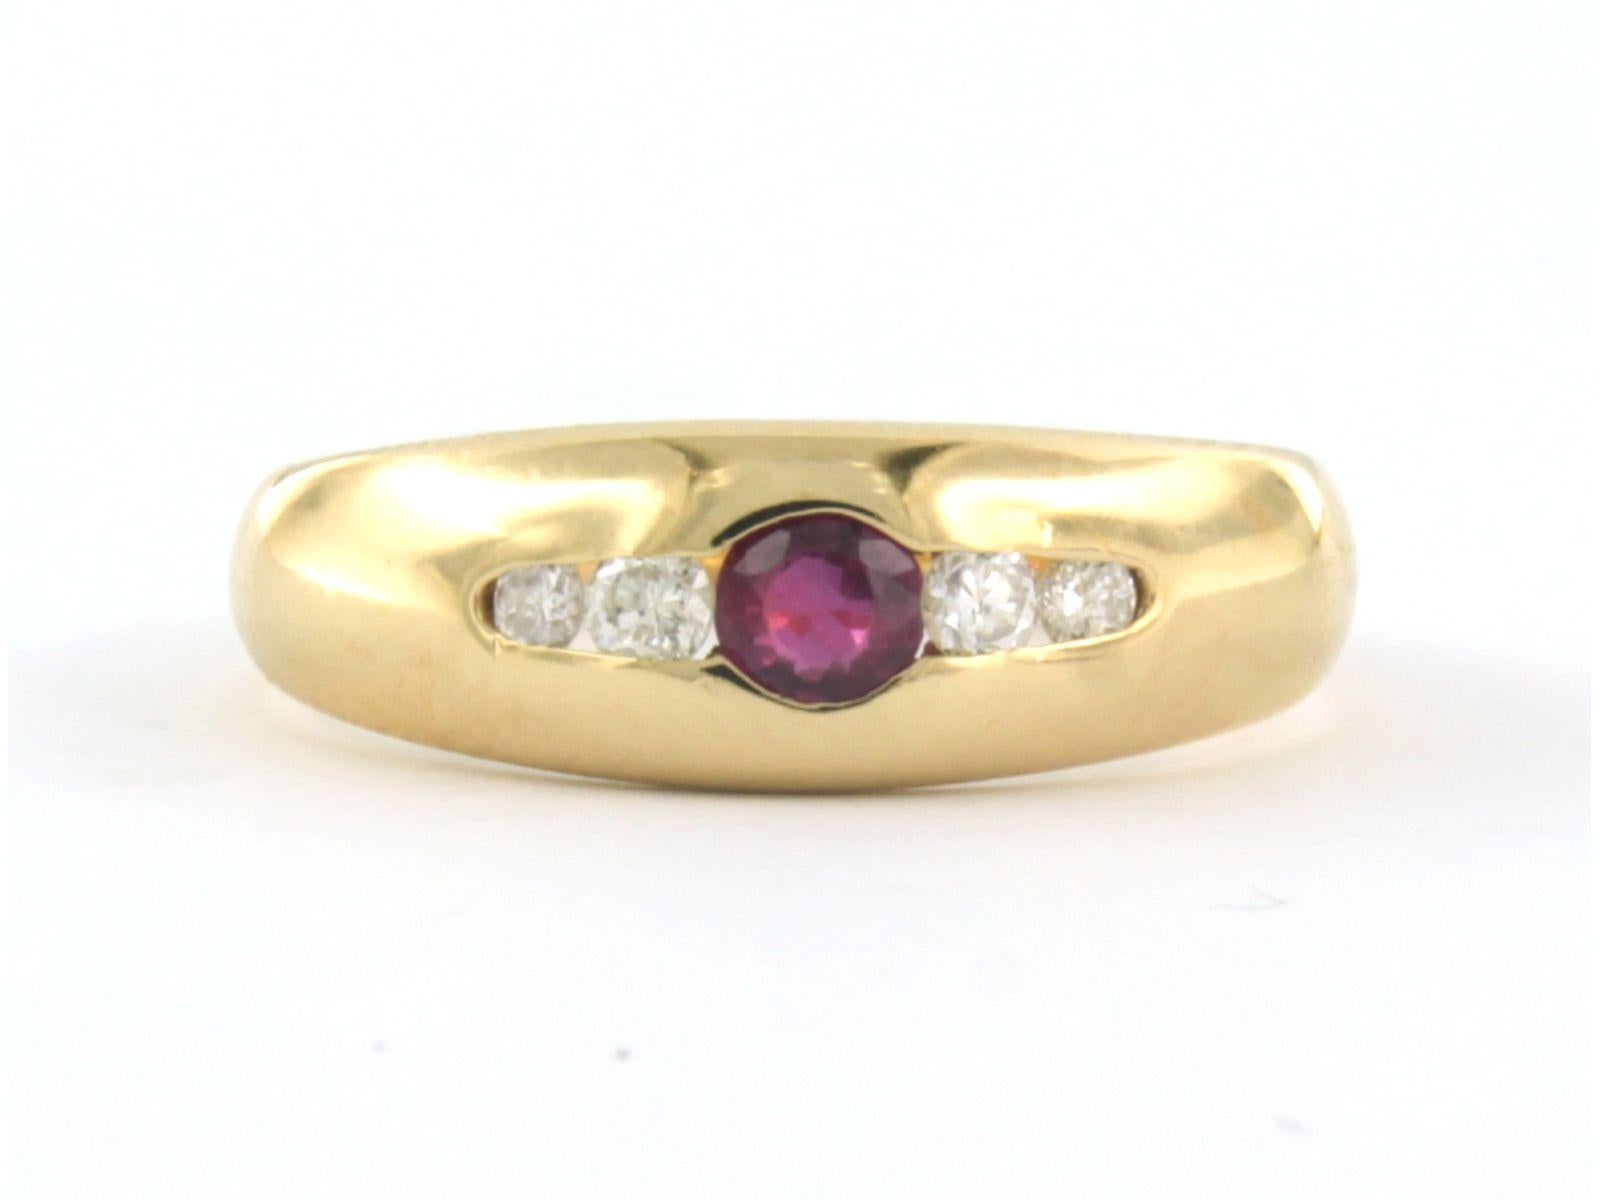 18k yellow gold ring set with ruby ​​and brilliant cut diamond 0.14 ct F/G VS/SI - ring size U.S. 6.5 - EU. 17(53)

detailed description

the top of the ring is 6.0 mm wide

weight 2.6 grams

ring size U.S. 6.5 - EU. 17(53), ring can be enlarged or